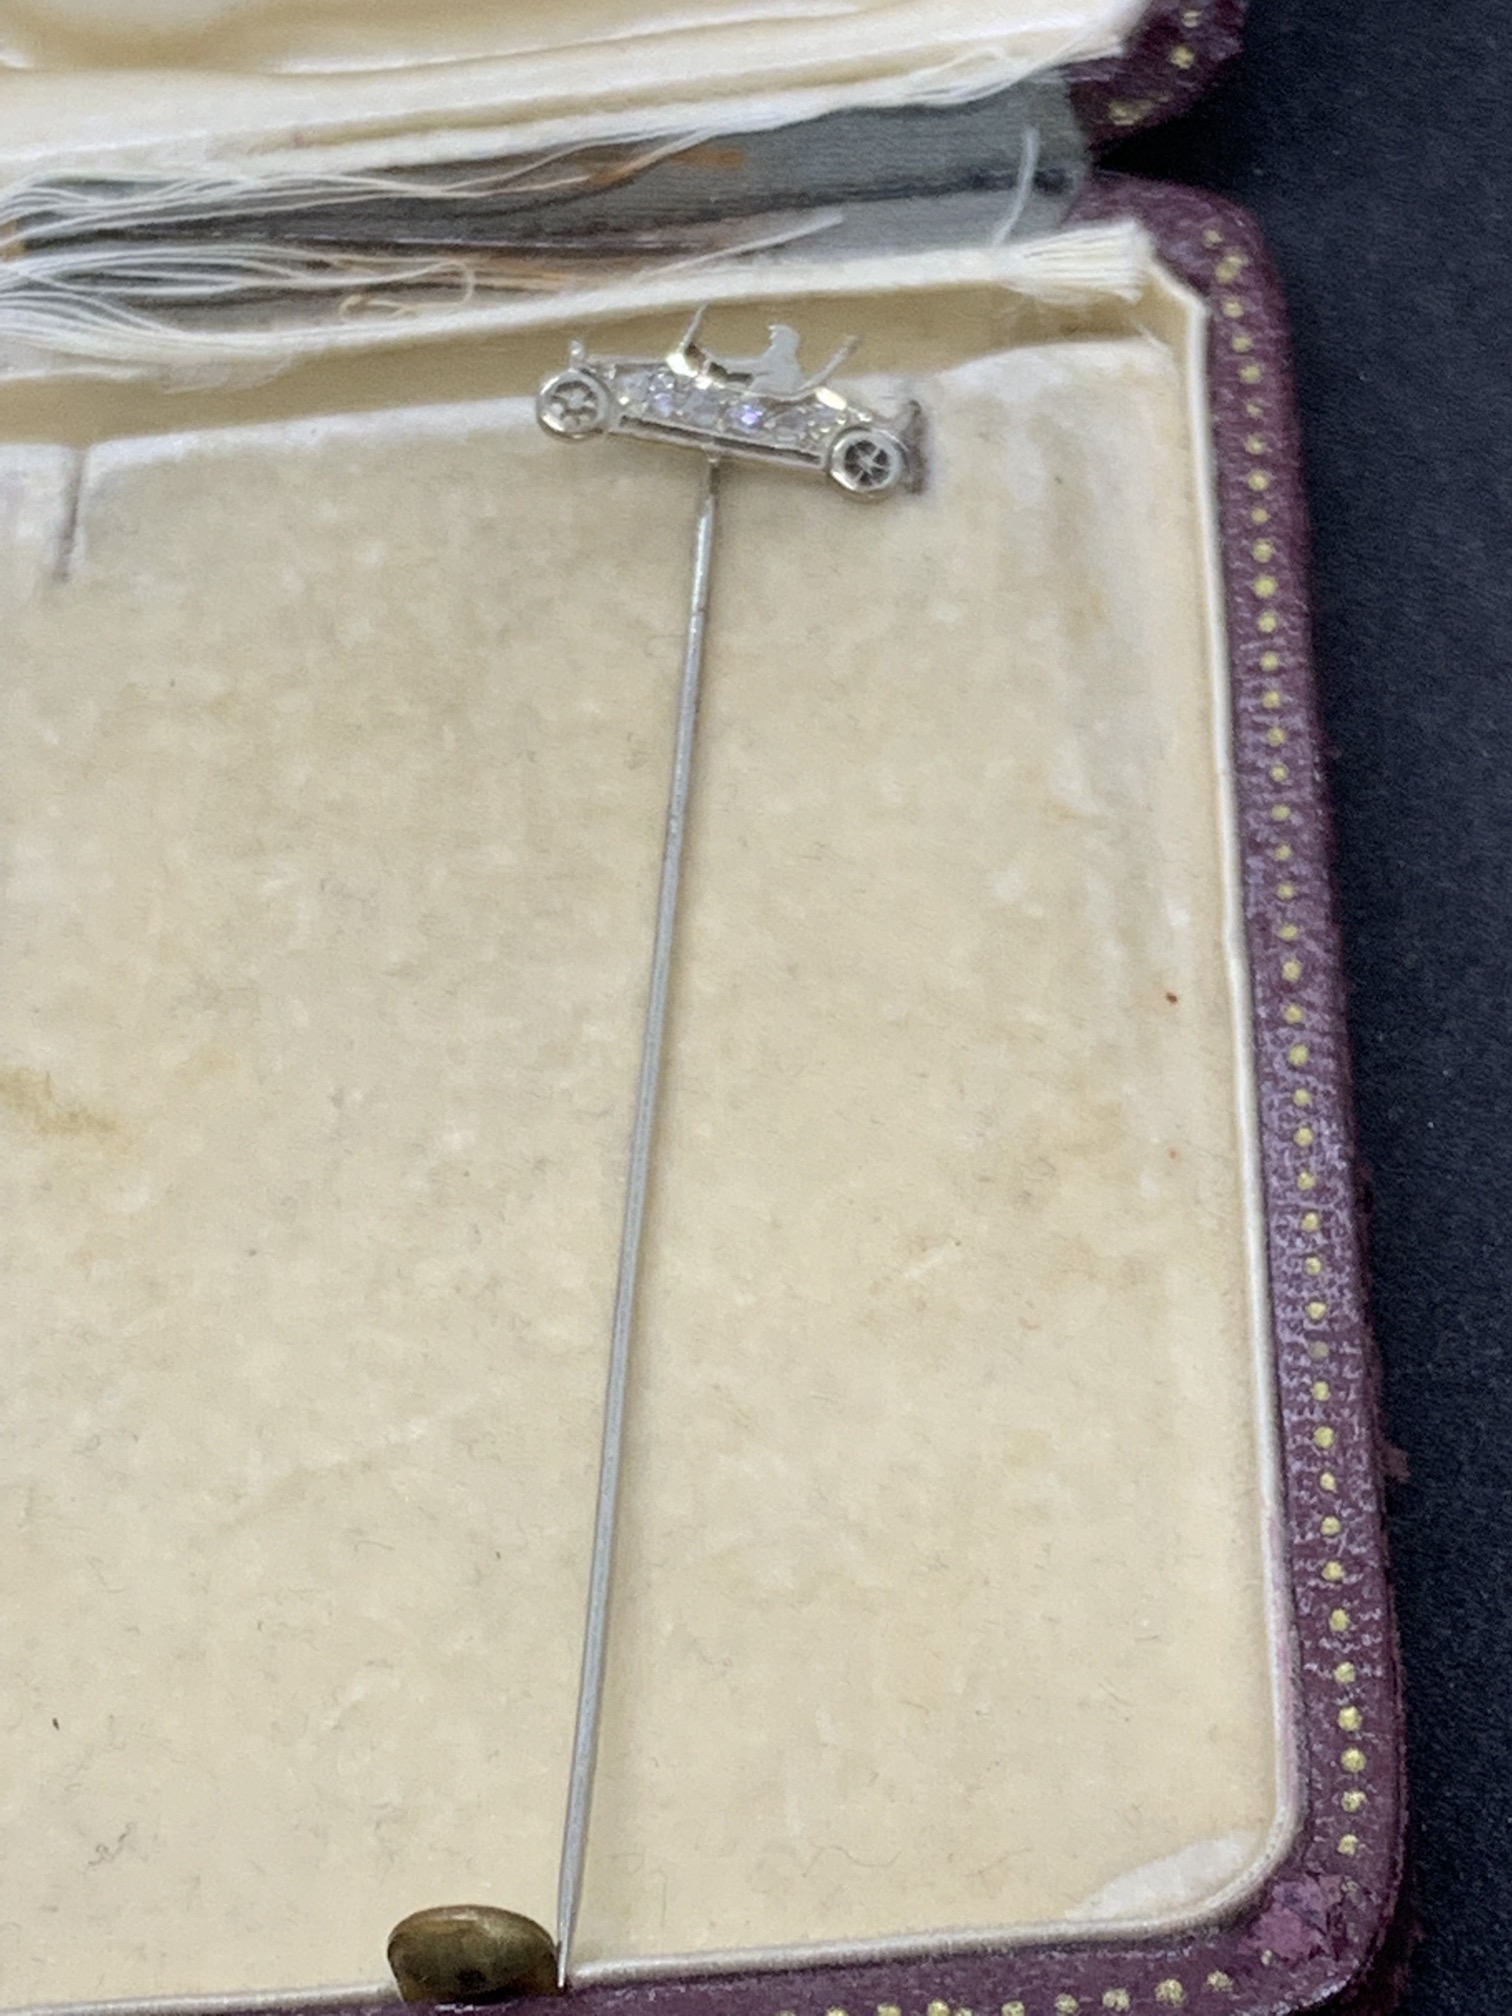 18ct GOLD TIE PIN SET WITH SEAL & CROWN - Image 2 of 2